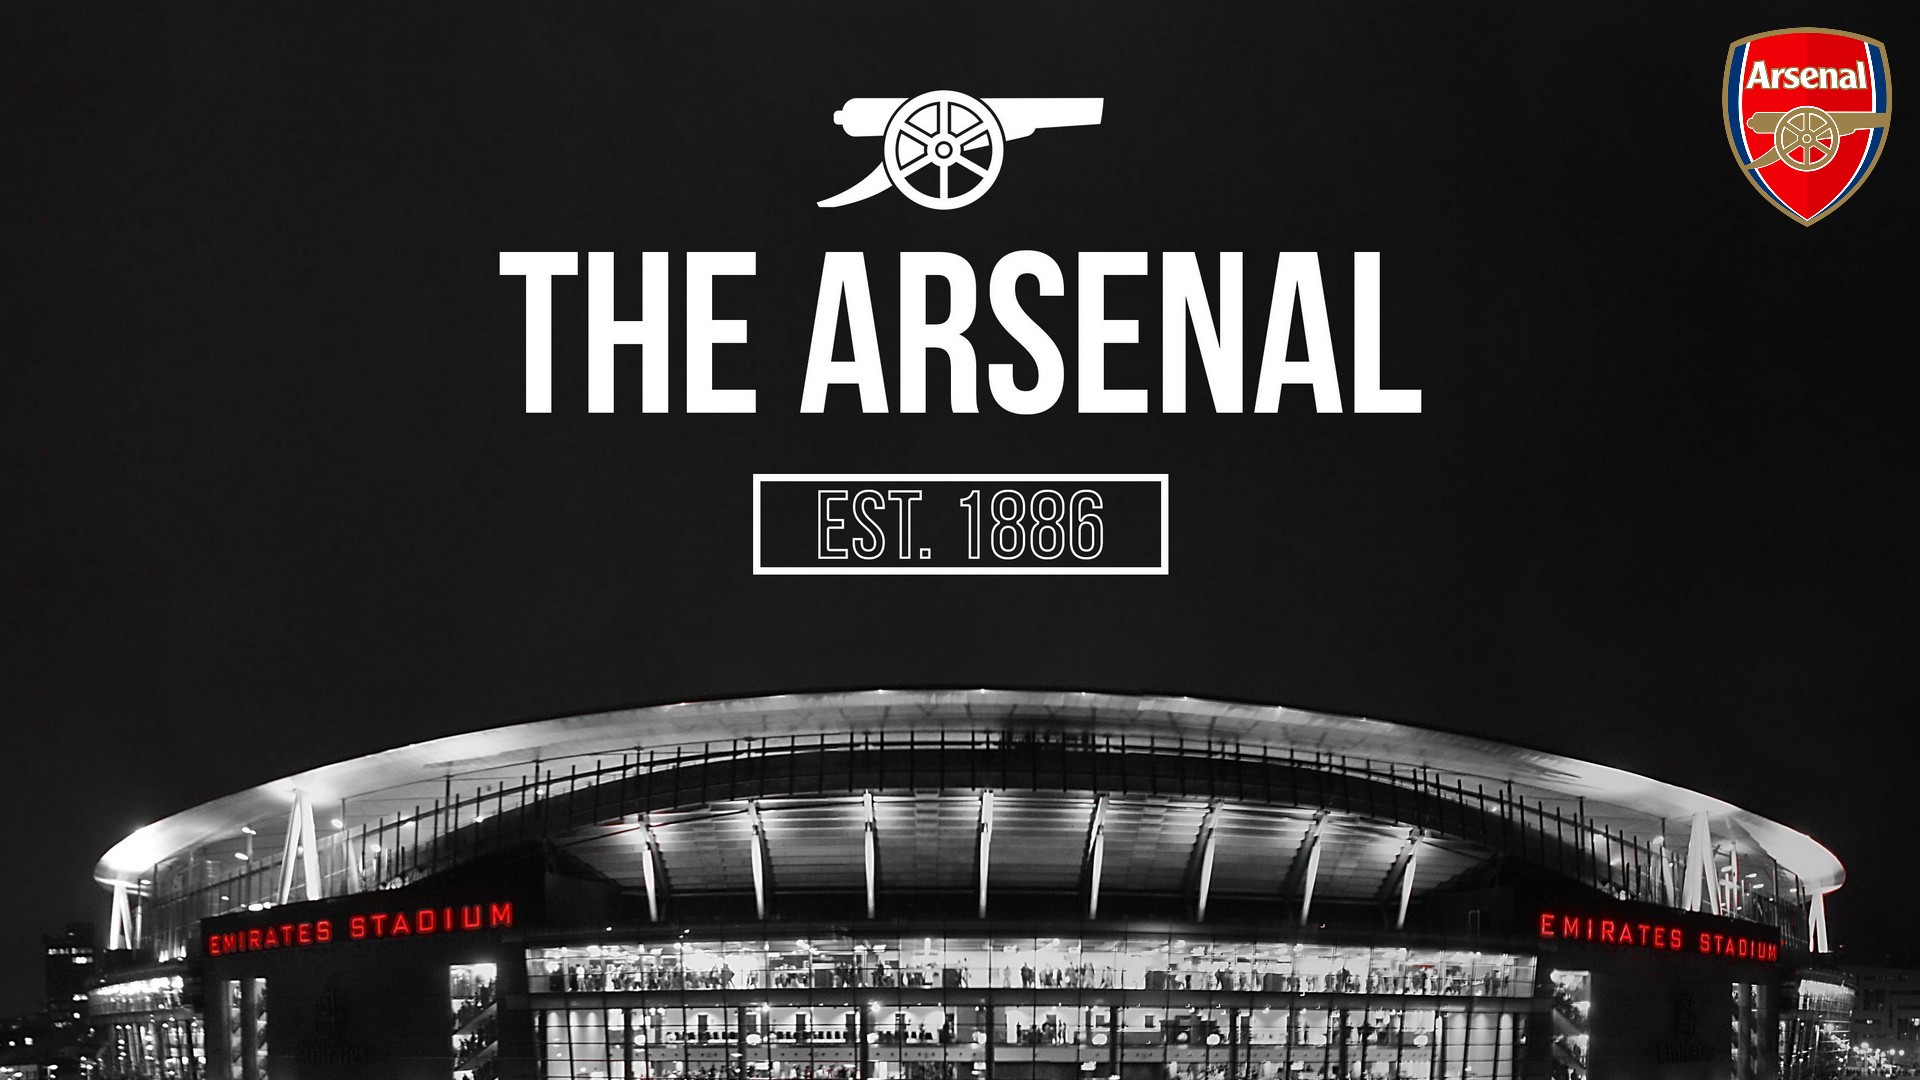 Arsenal Stadium Desktop Wallpapers With Resolution 1920X1080 pixel. You can make this wallpaper for your Mac or Windows Desktop Background, iPhone, Android or Tablet and another Smartphone device for free